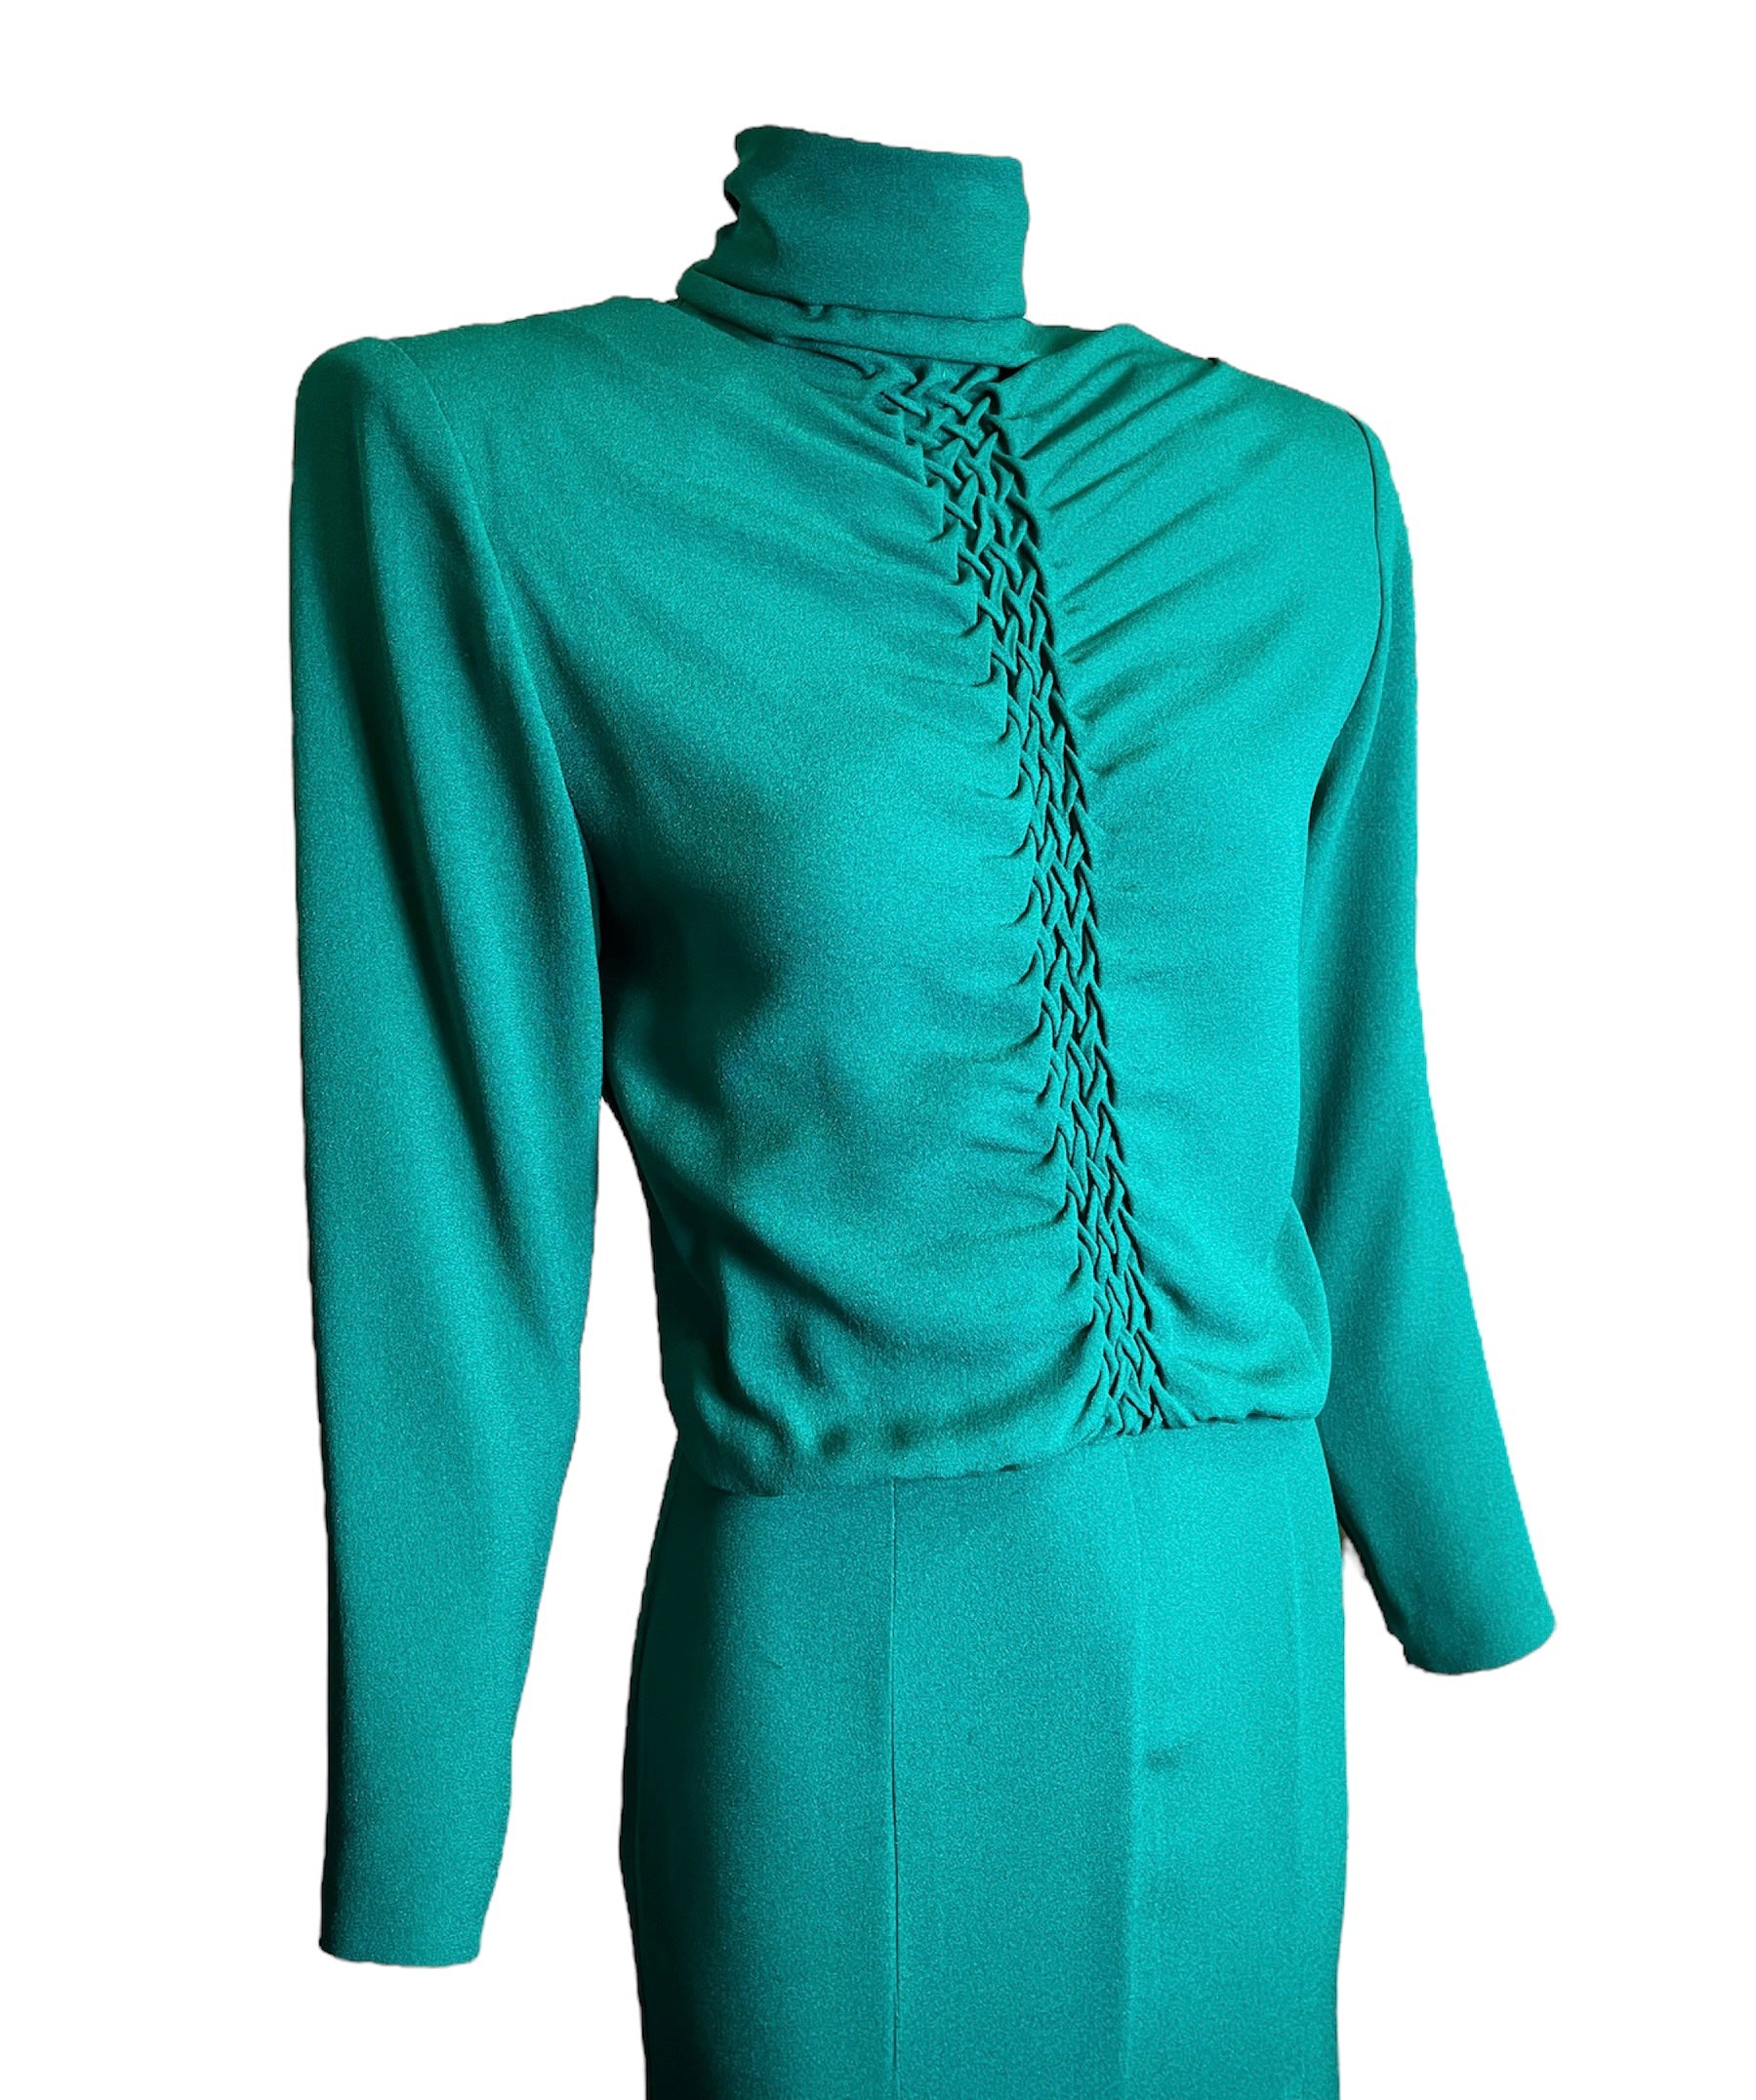 Galanos 80s Emerald Green Gown w/ Woven Front Detail DETAIL PHOTO 2 OF 5